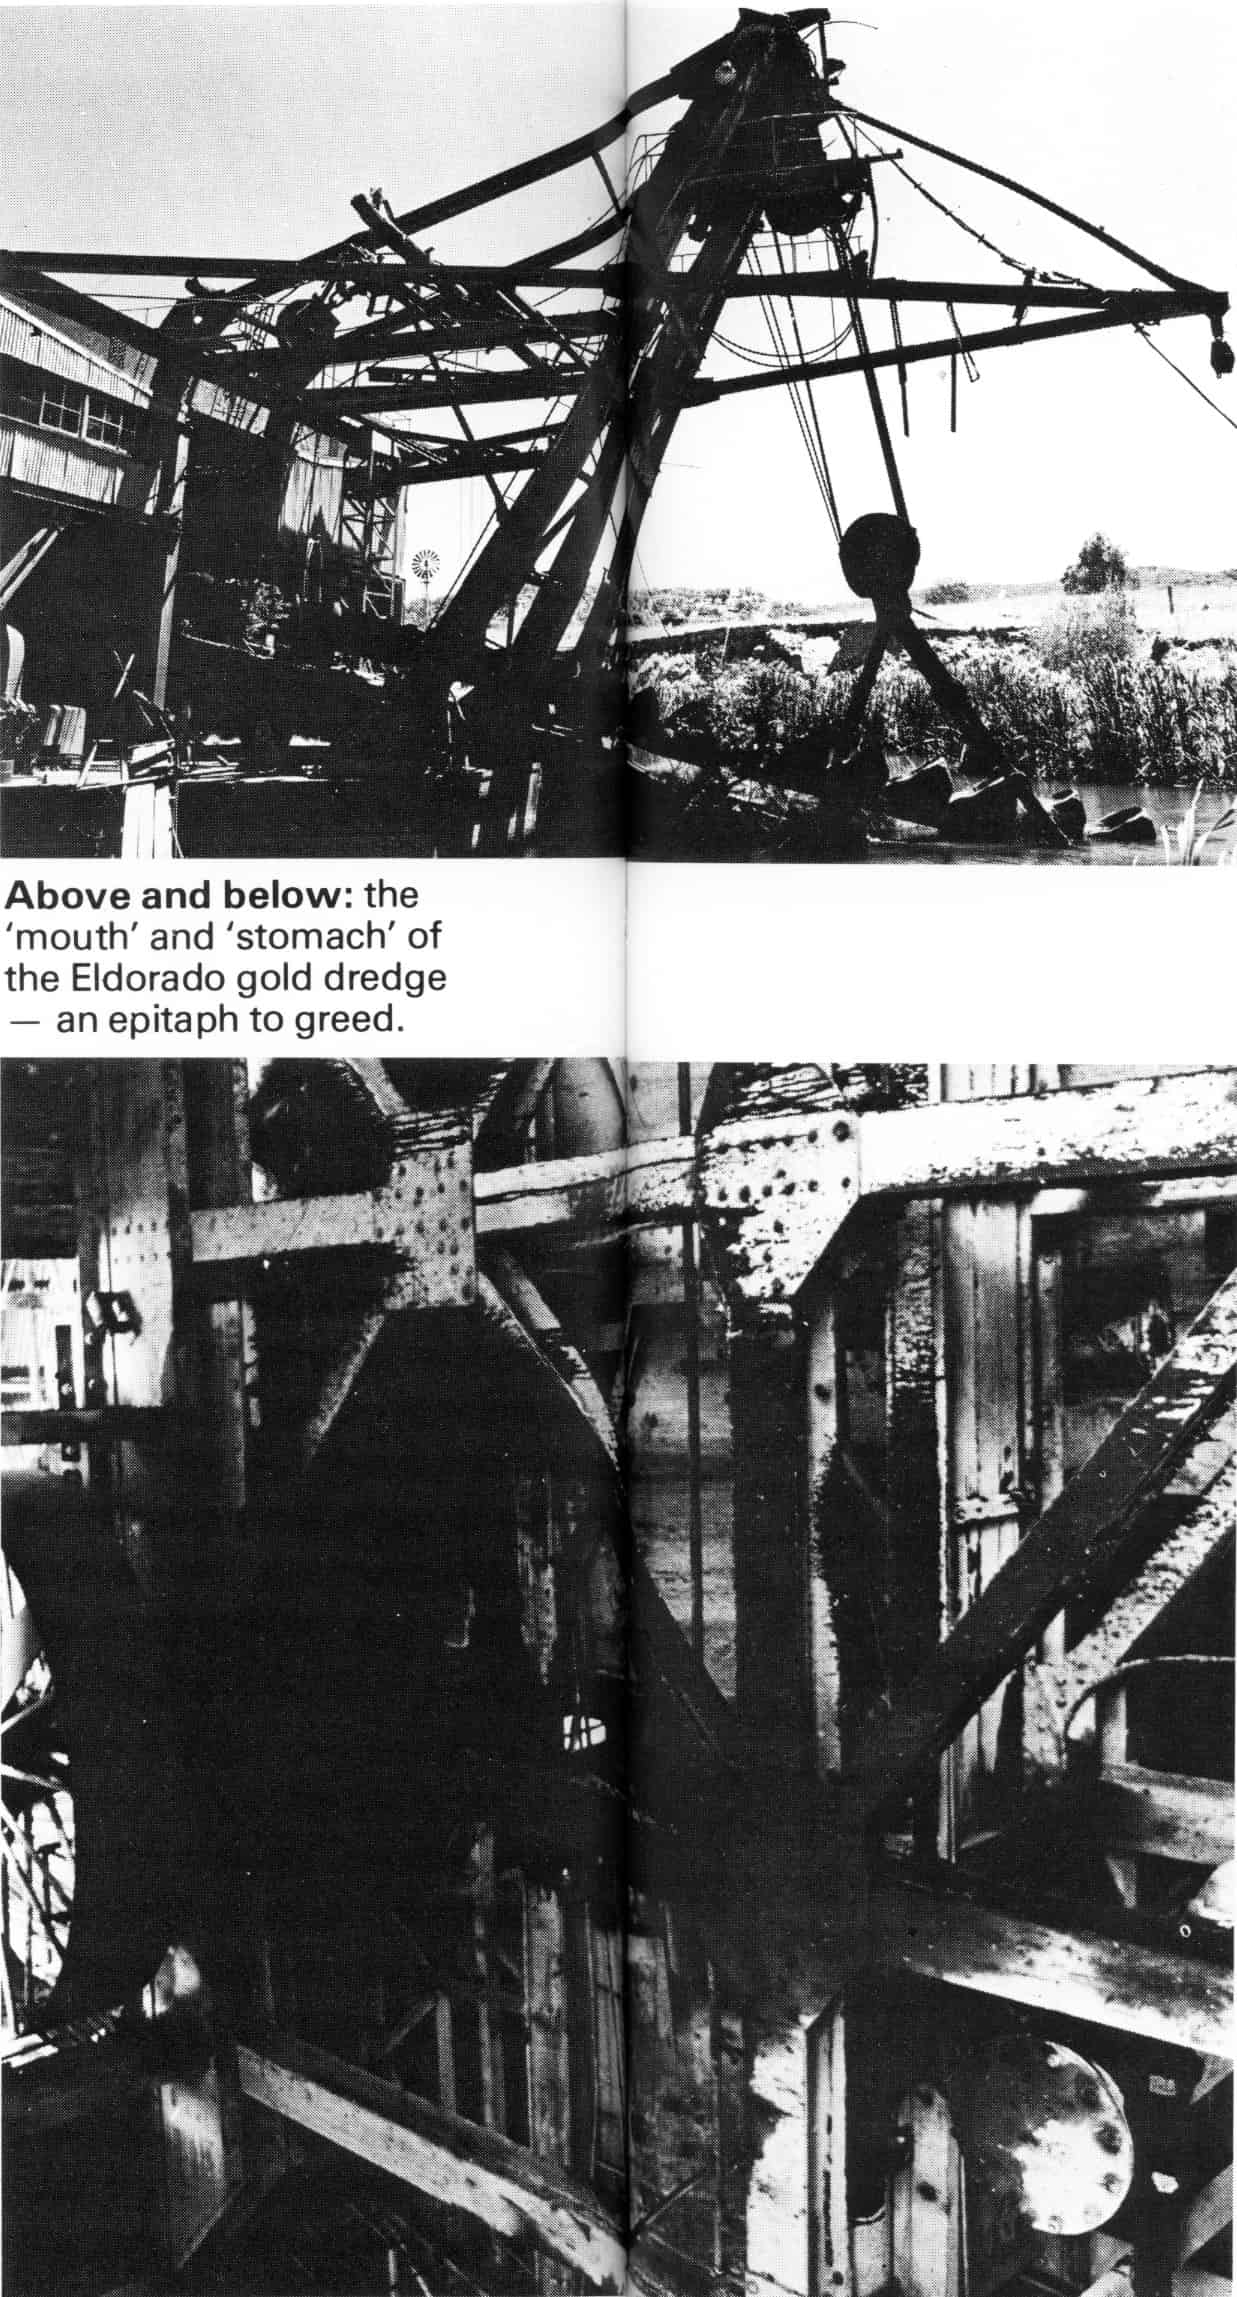 The Mouth and stomach of the Eldorado gold dredge